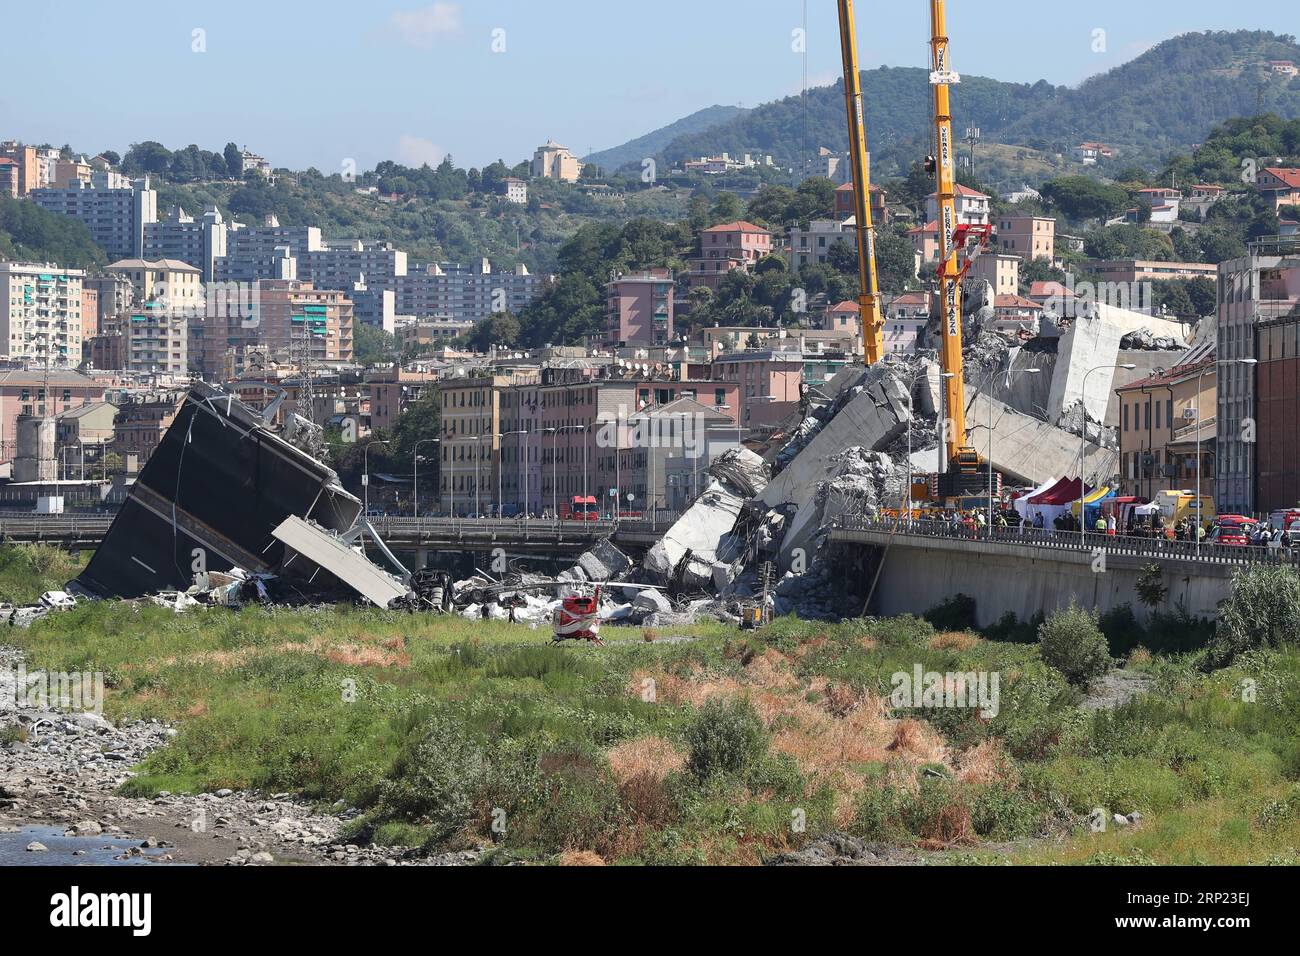 (180815) -- GENOA, Aug. 15, 2018 -- Rescuers work at the site of the collapsed bridge in Genoa, Italy, Aug. 15, 2018. At least 31 people died in Tuesday s collapse of a motorway bridge in Genoa, northwestern Italy, as search and rescue continued on Wednesday. ) (lrz) ITALY-GENOA-BRIDGE COLLAPSE ZhengxHuansong PUBLICATIONxNOTxINxCHN Stock Photo